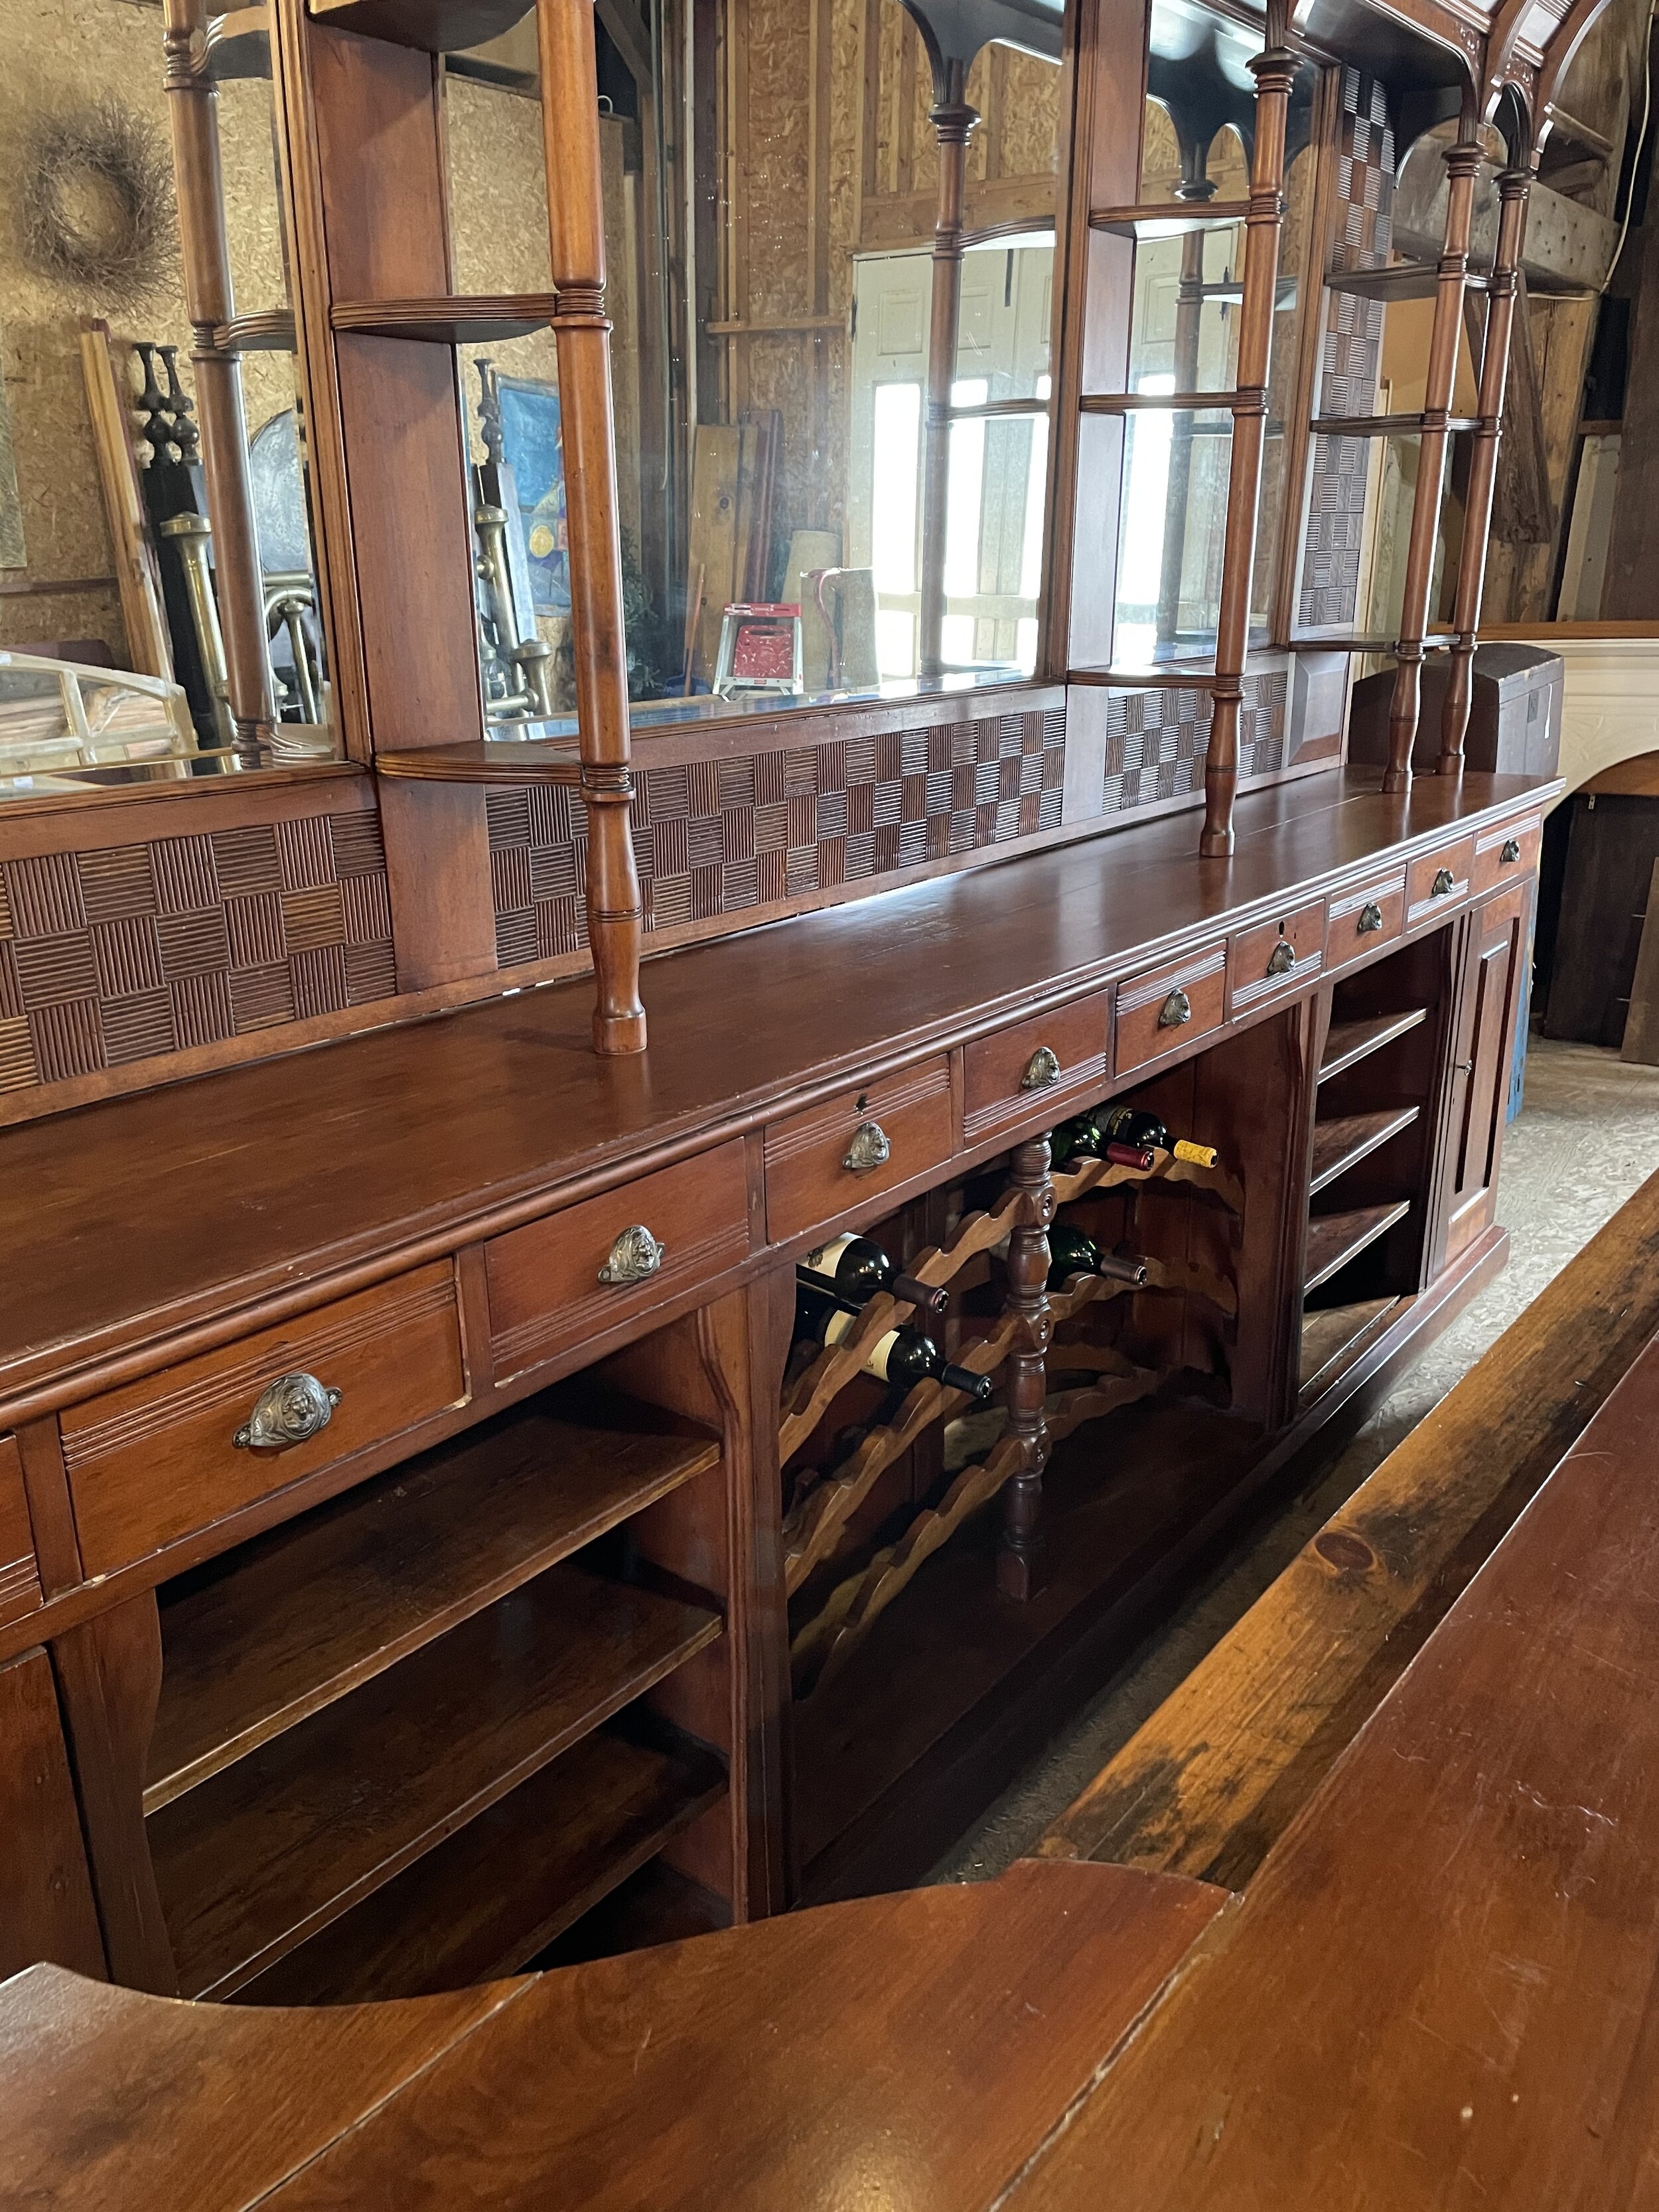  BW-1 &amp;2 Back and Front Bar. Solid cherry with birdseye maple front bar arm rail.  Circa 1900. $26000.00. Back bar is 2 pieces (base and top). Top measures 12’6”L (at crown molding). Base measures 12”L x 20” W x 43”H. Total height is 100”H. Back 